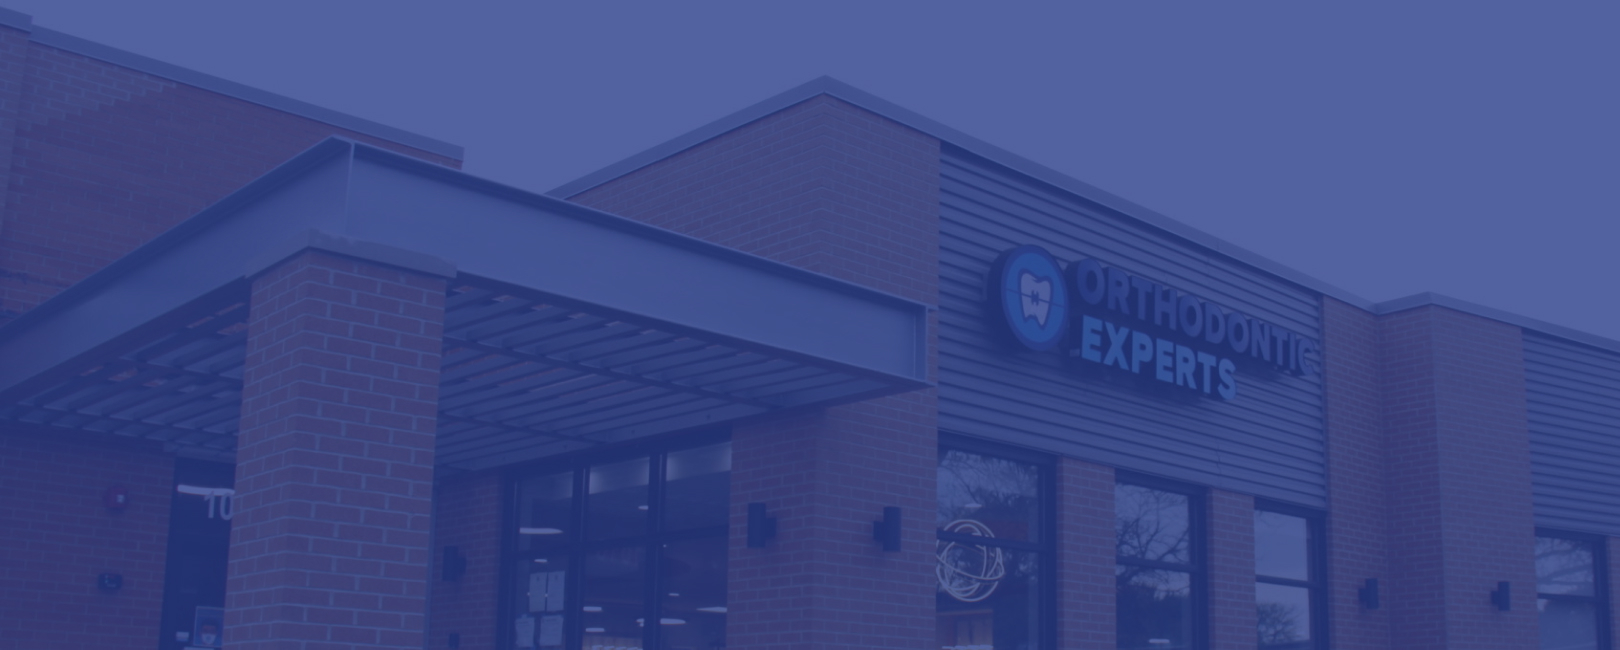 Orthodontic Experts Keeps Their Momentum Going – Next Stop Is Orland Park!